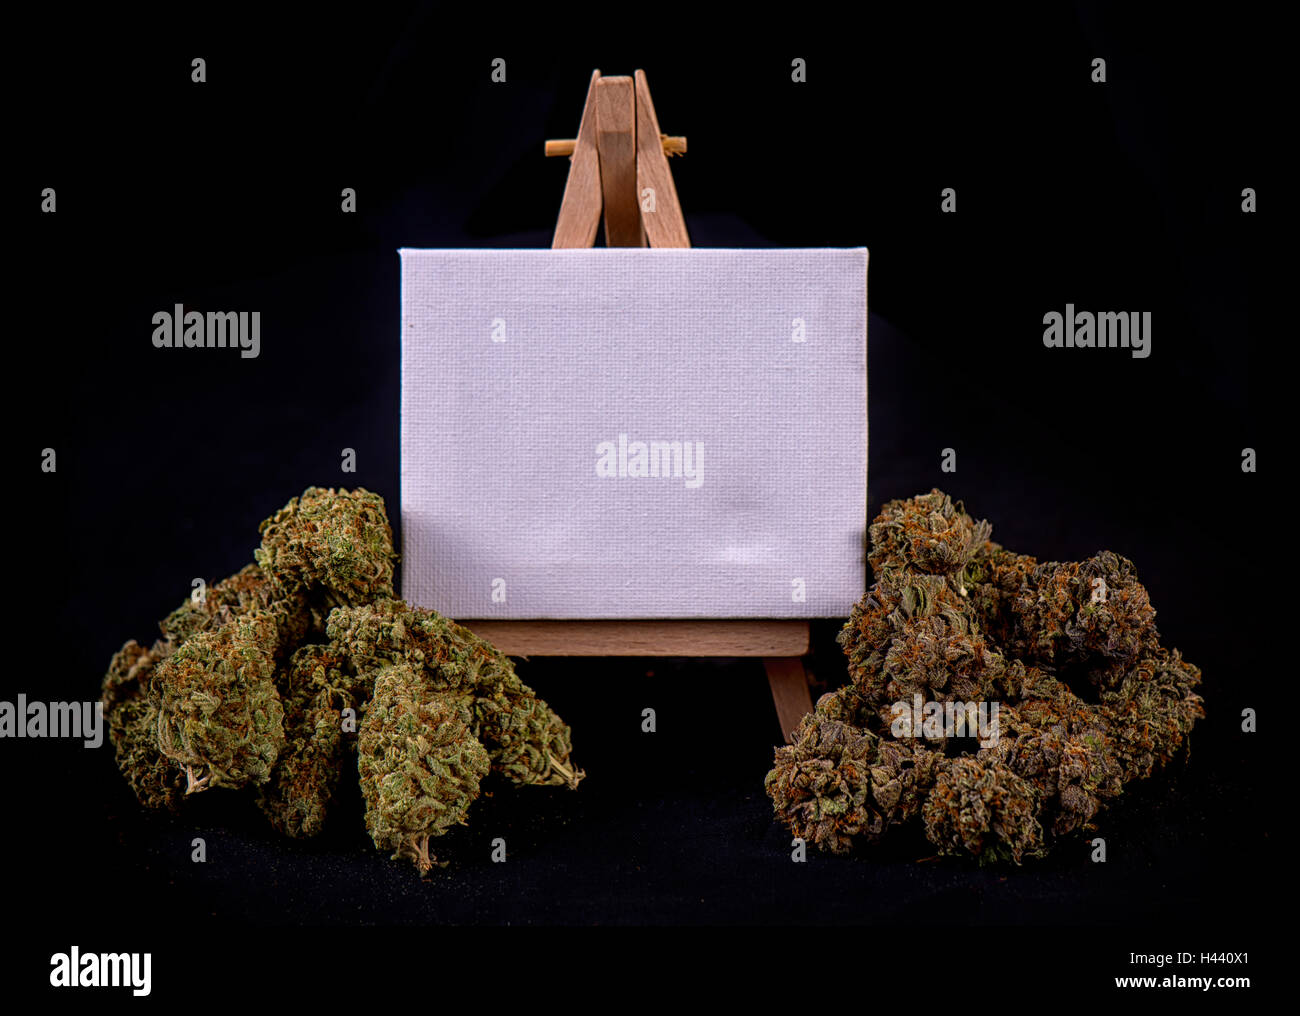 Blank canvas on easel with dried cannabis buds isolated over black background Stock Photo